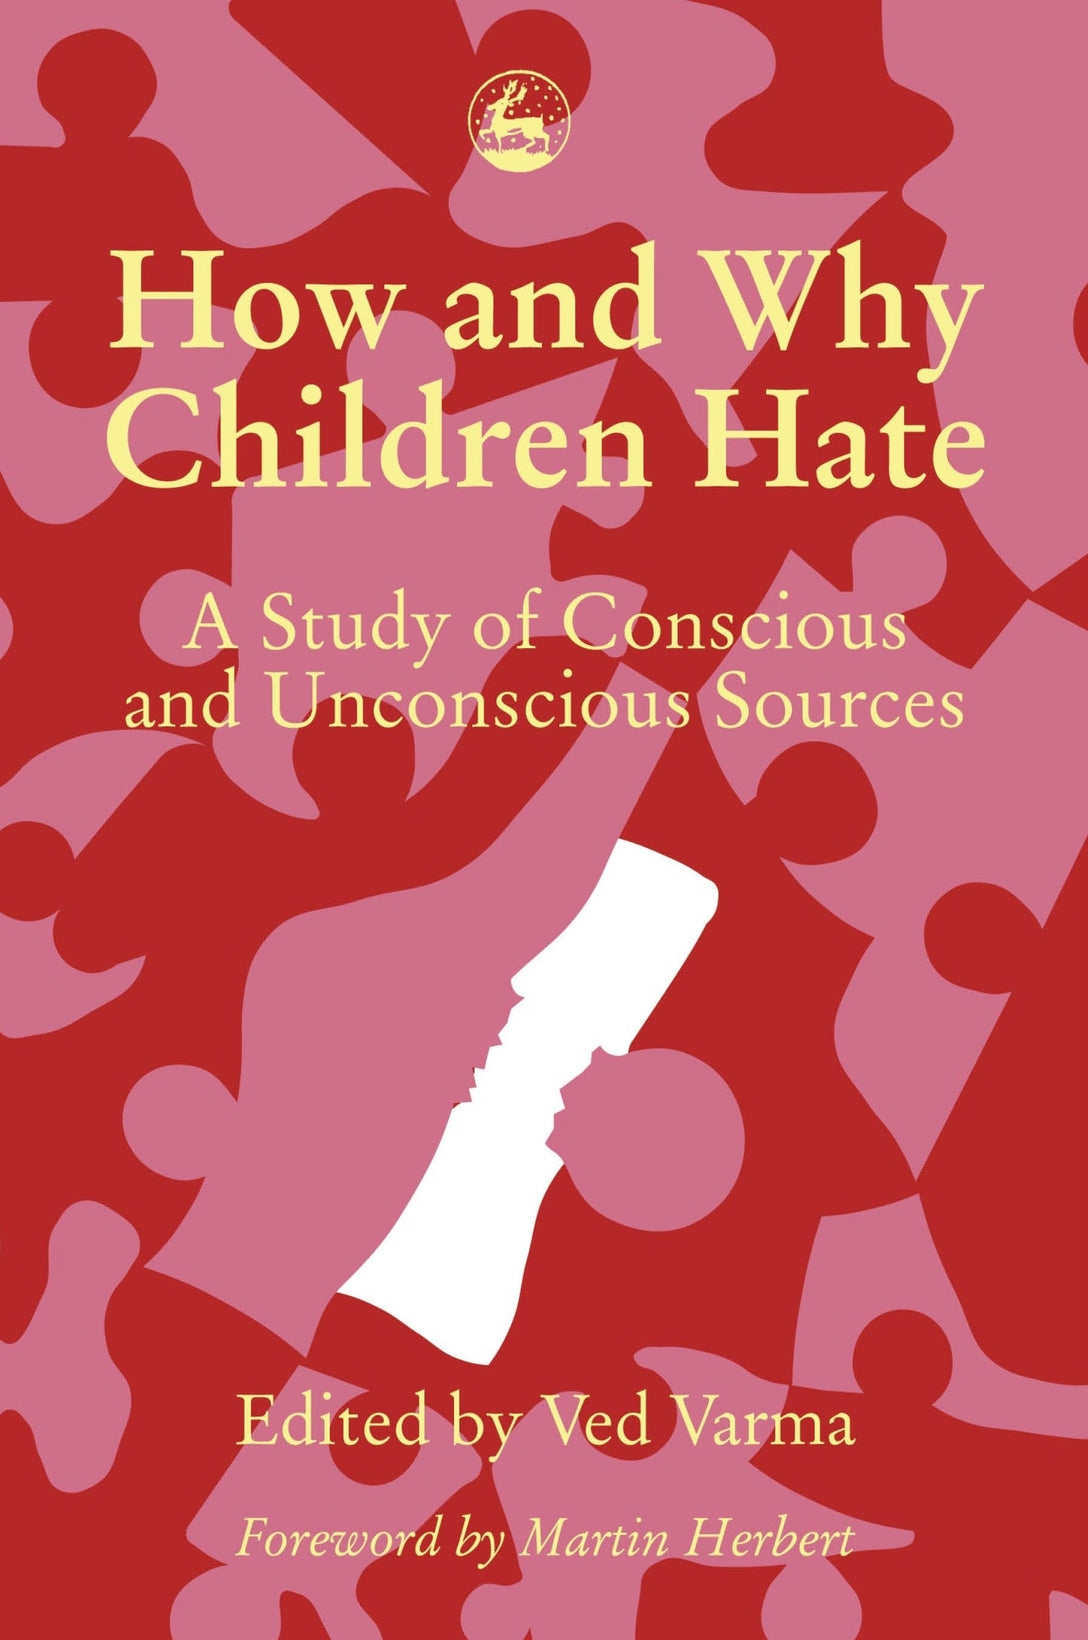 How and Why Children Hate by Ved P Varma